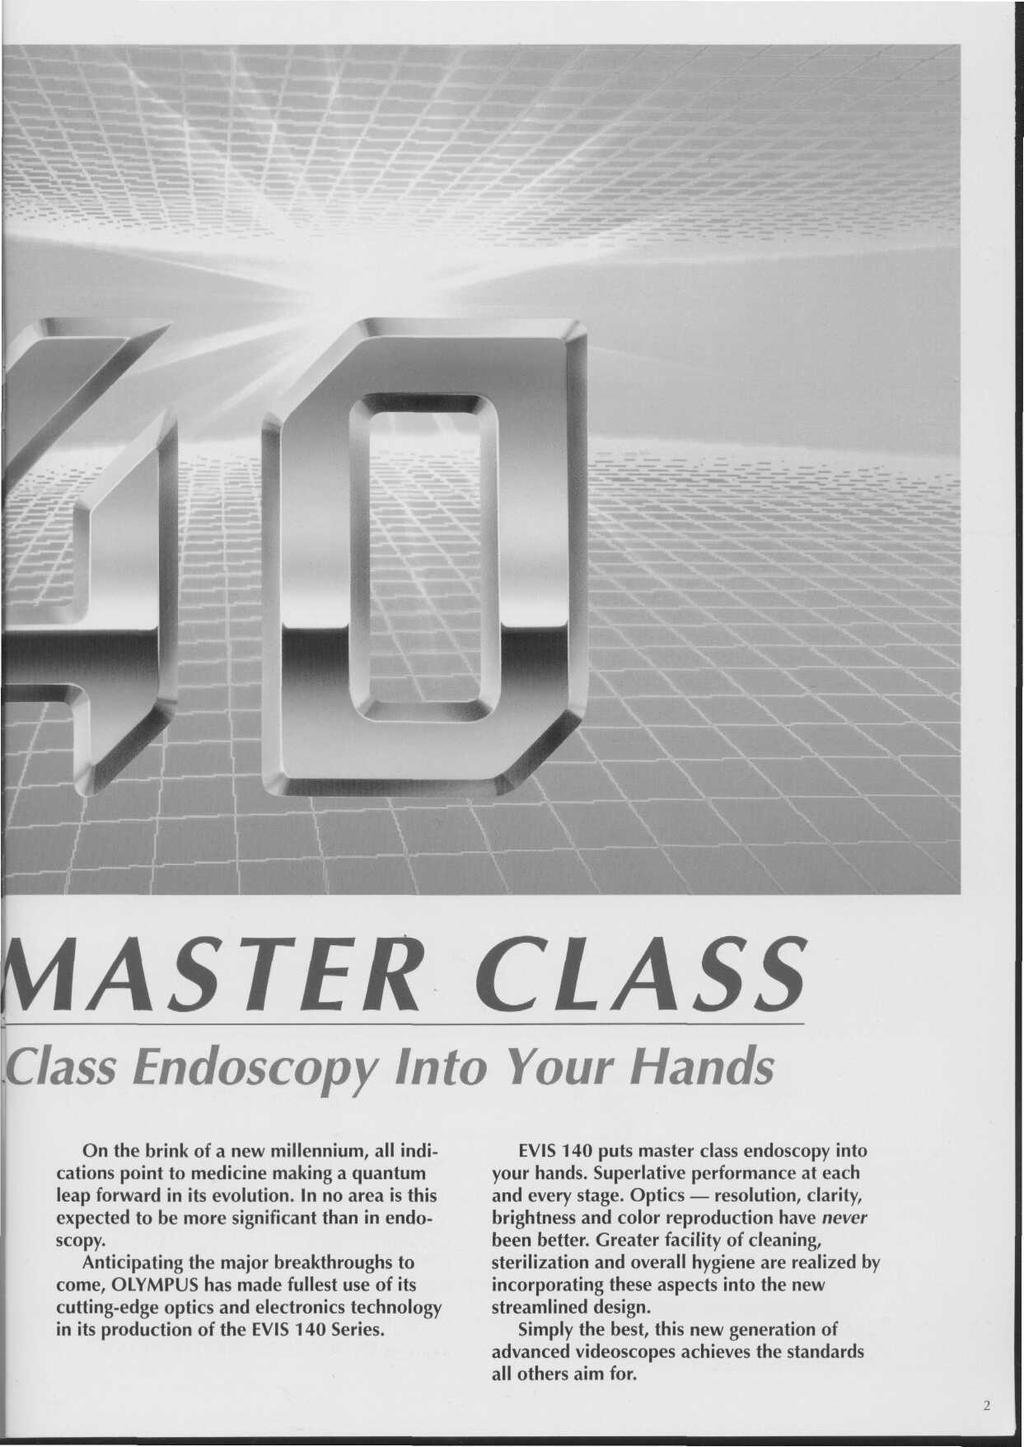 MASTER CLASS. \Class Endoscopy Into Your Hands On the brink of a new millennium, all indications point to medicine making a quantum leap forward in its evolution.